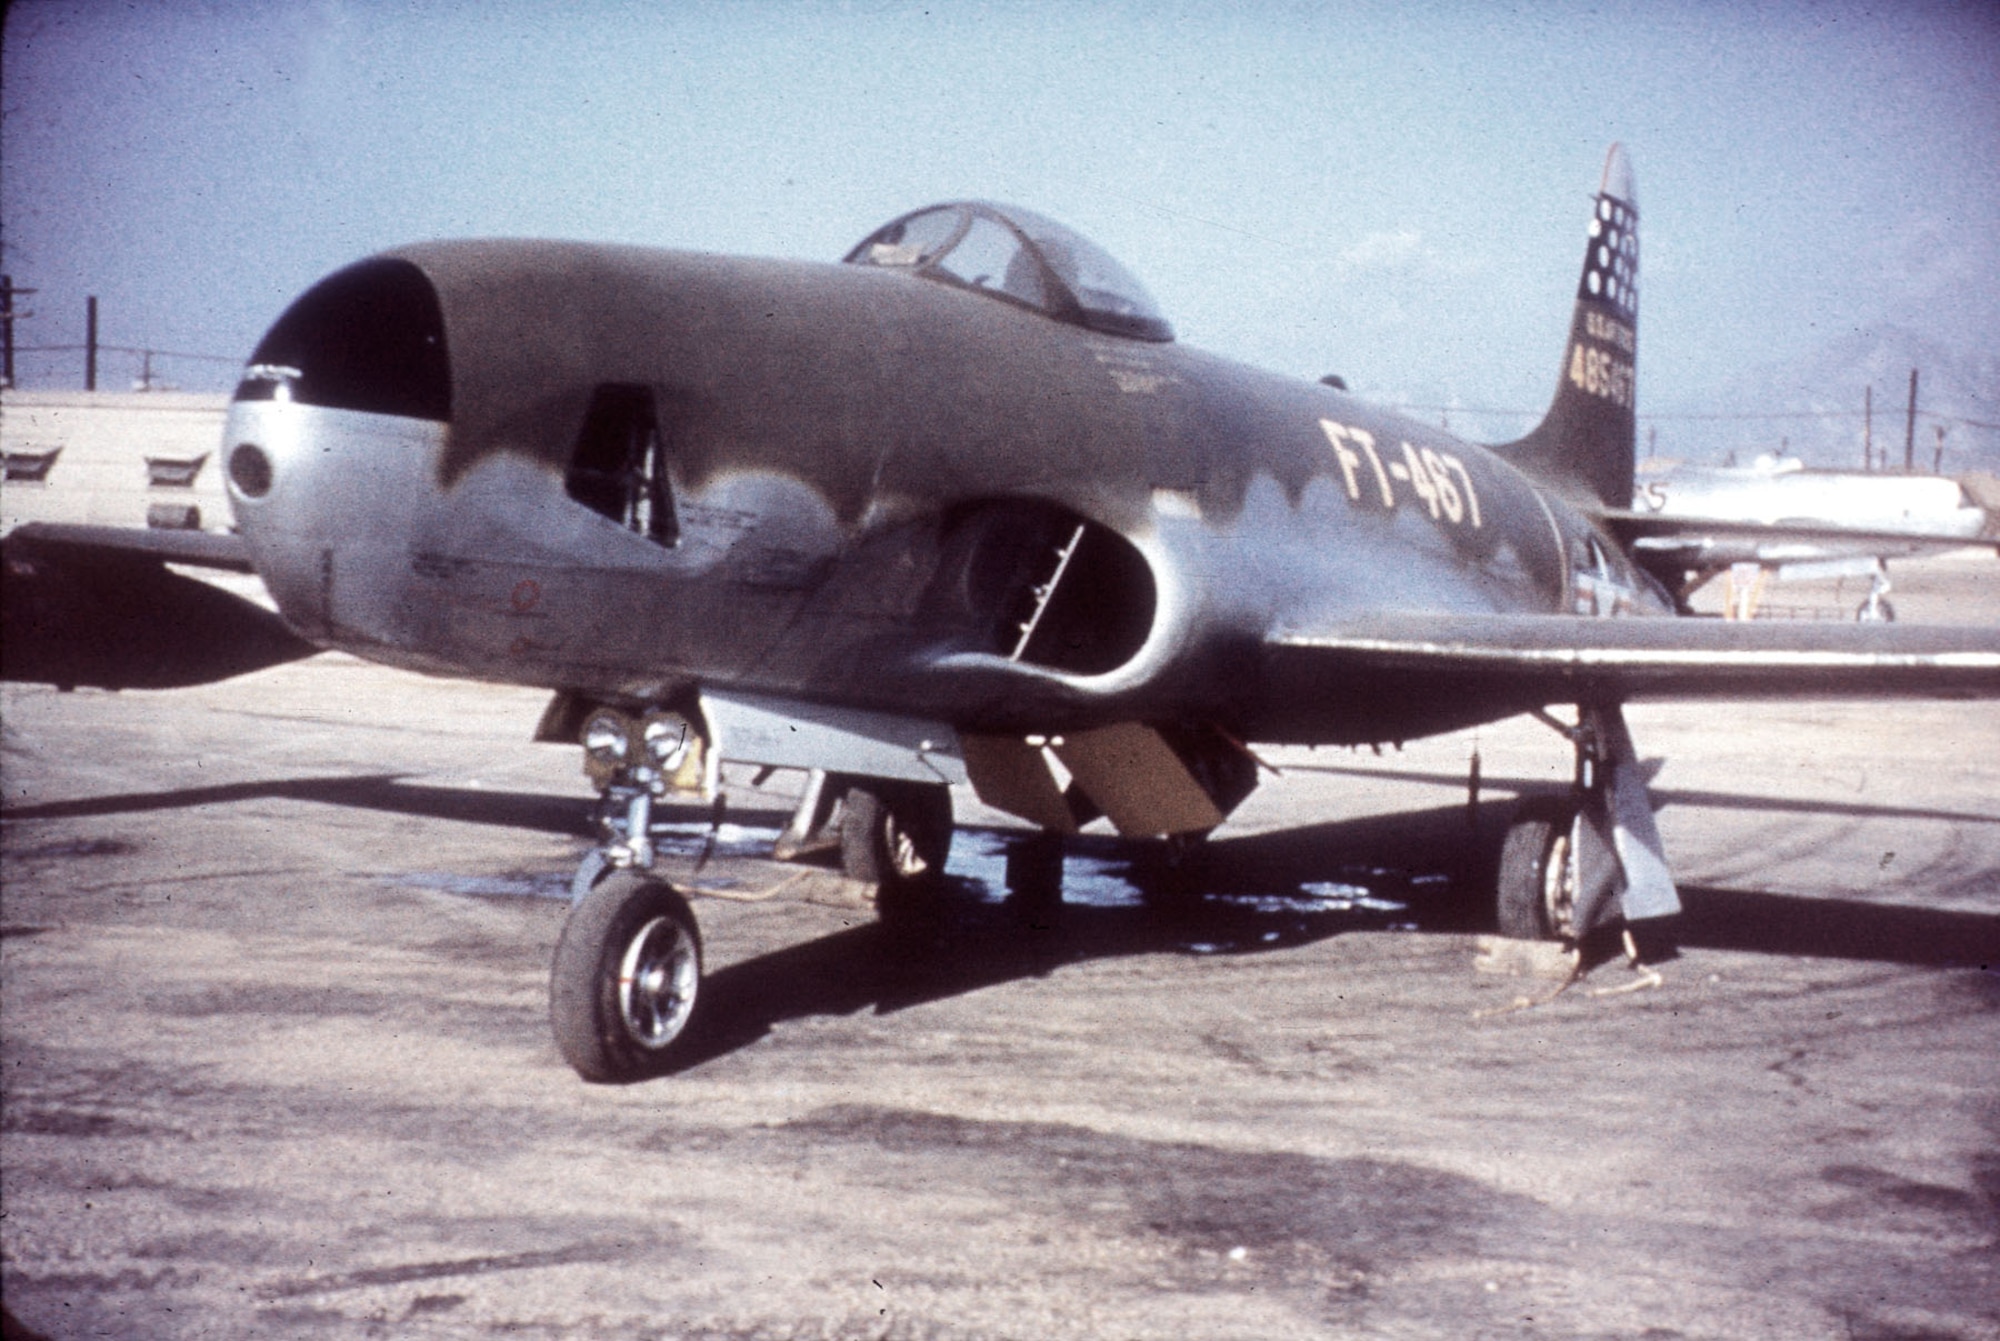 A few RF-80s received an experimental olive drab paint job to be less visible to communist MiG fighters. (U.S. Air Force photo)